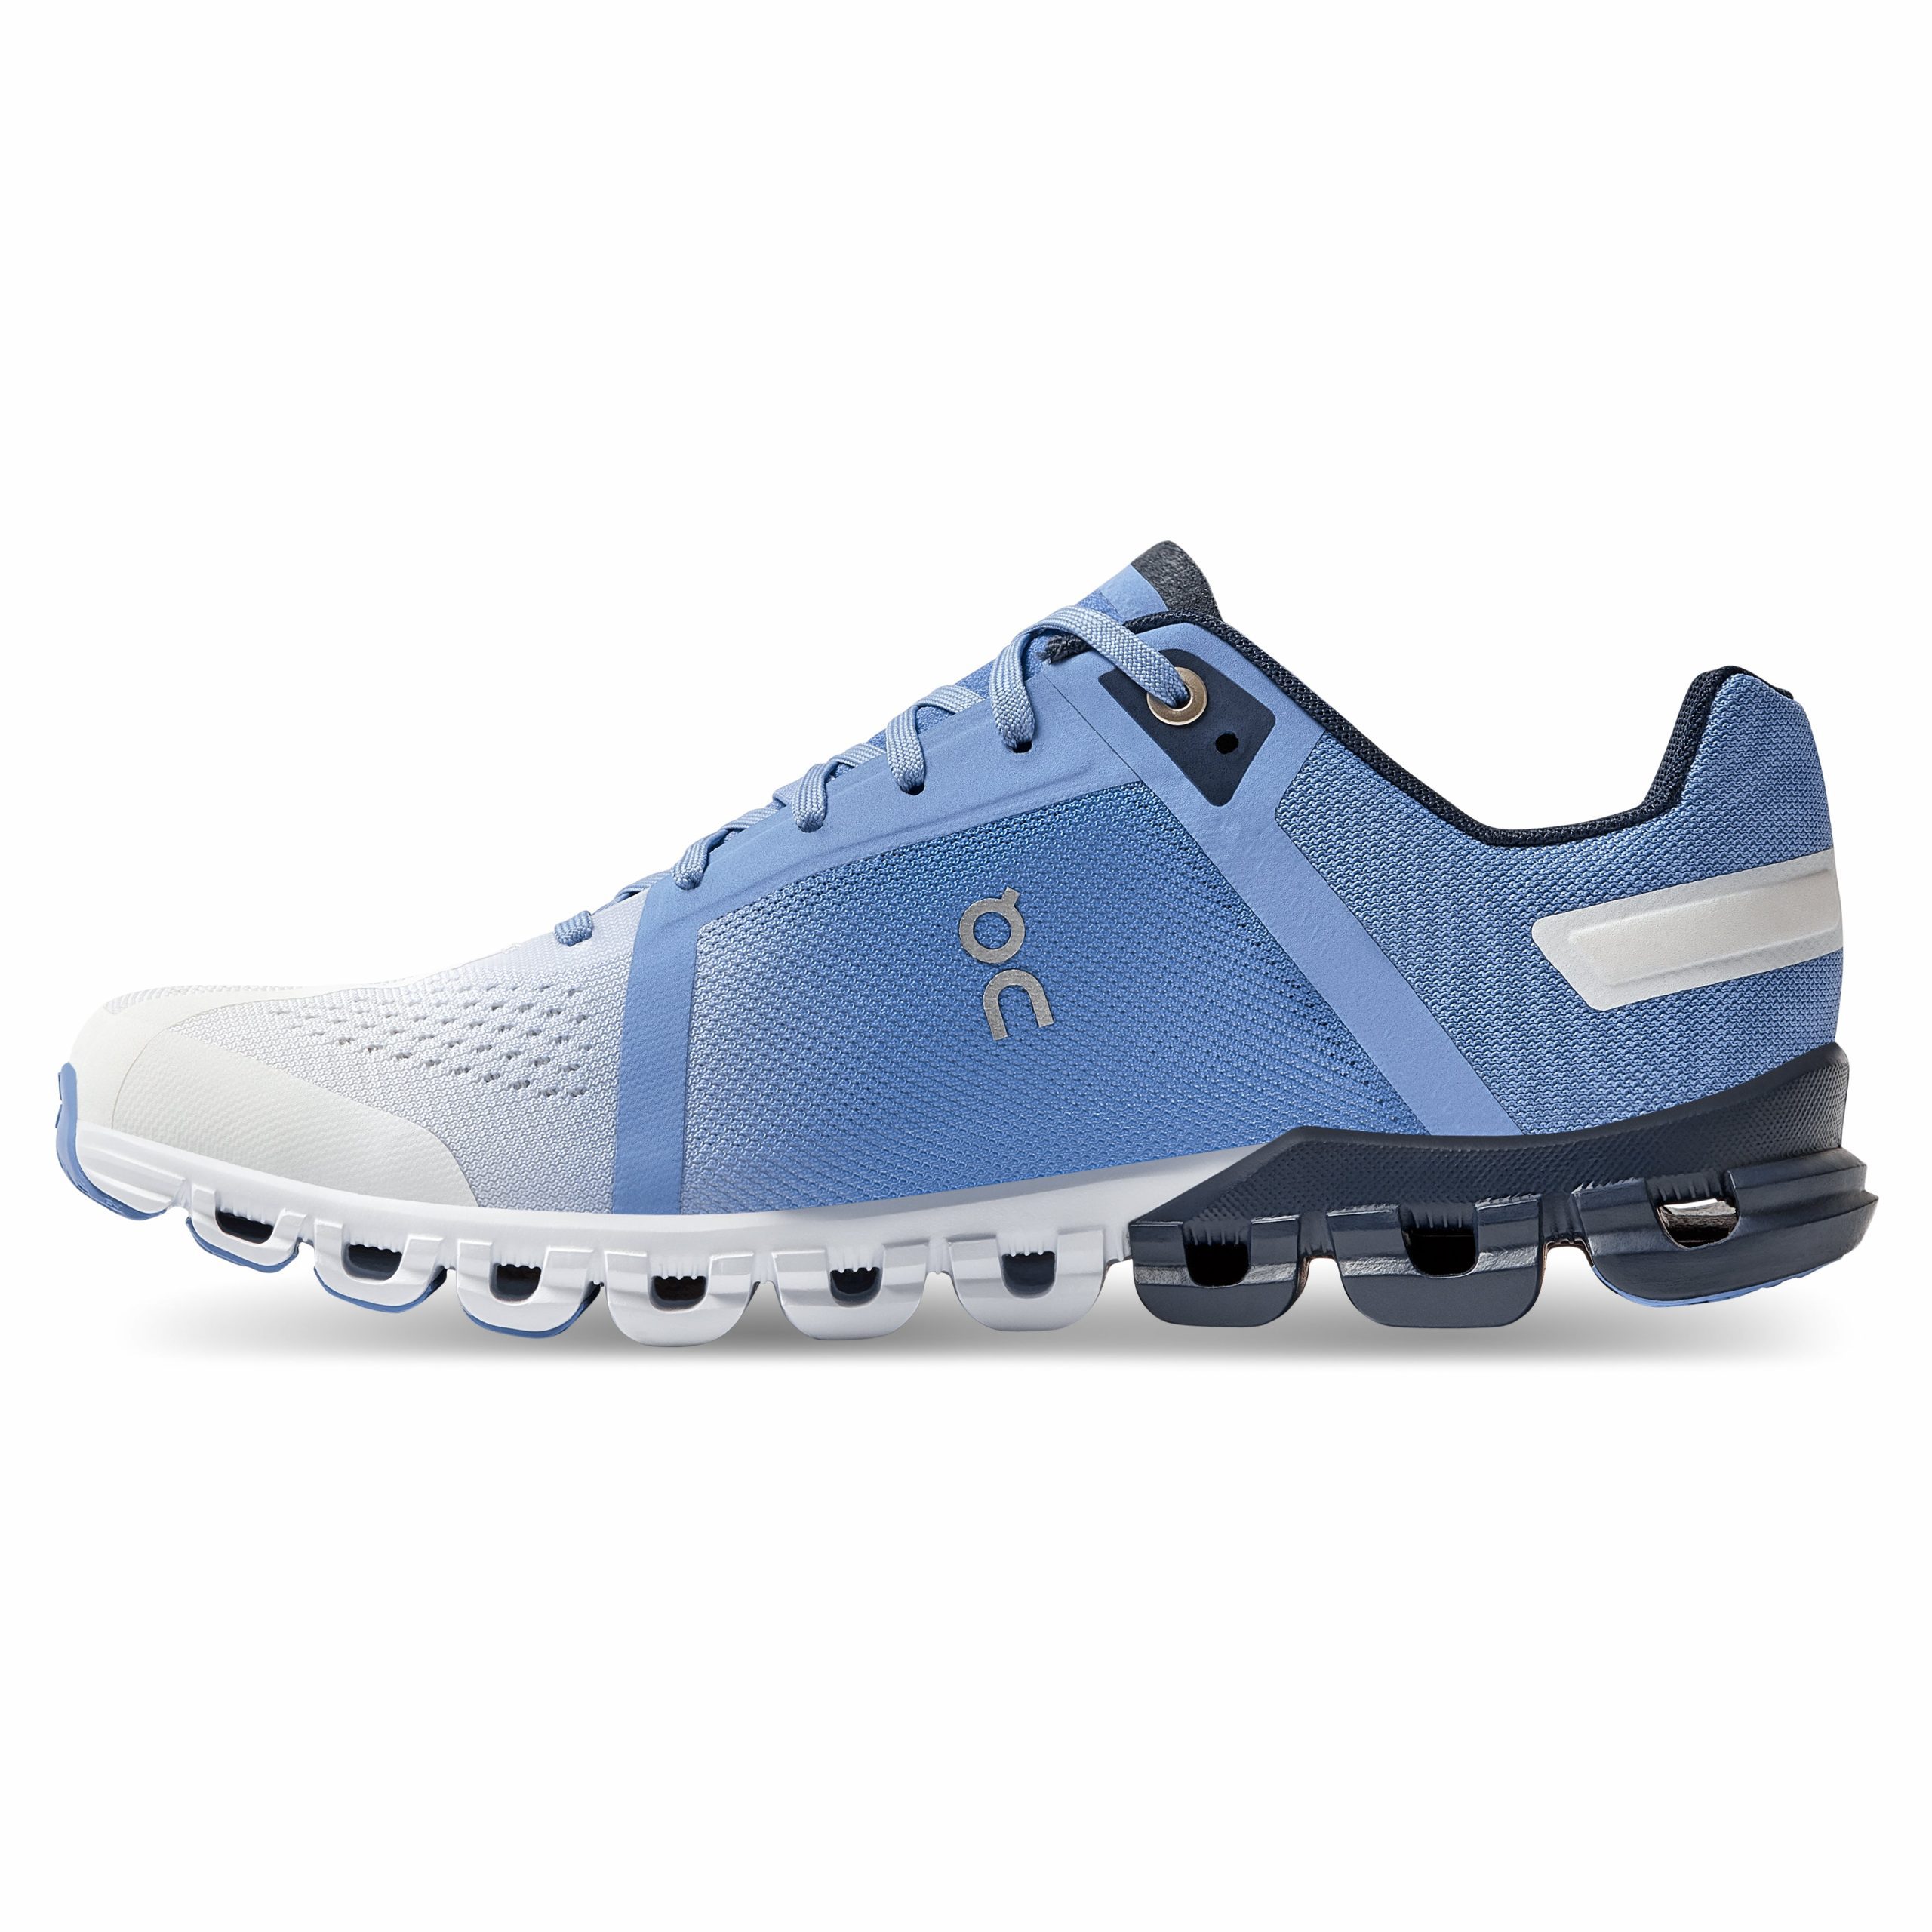 Cloudflow 4 running shoes in blue - On